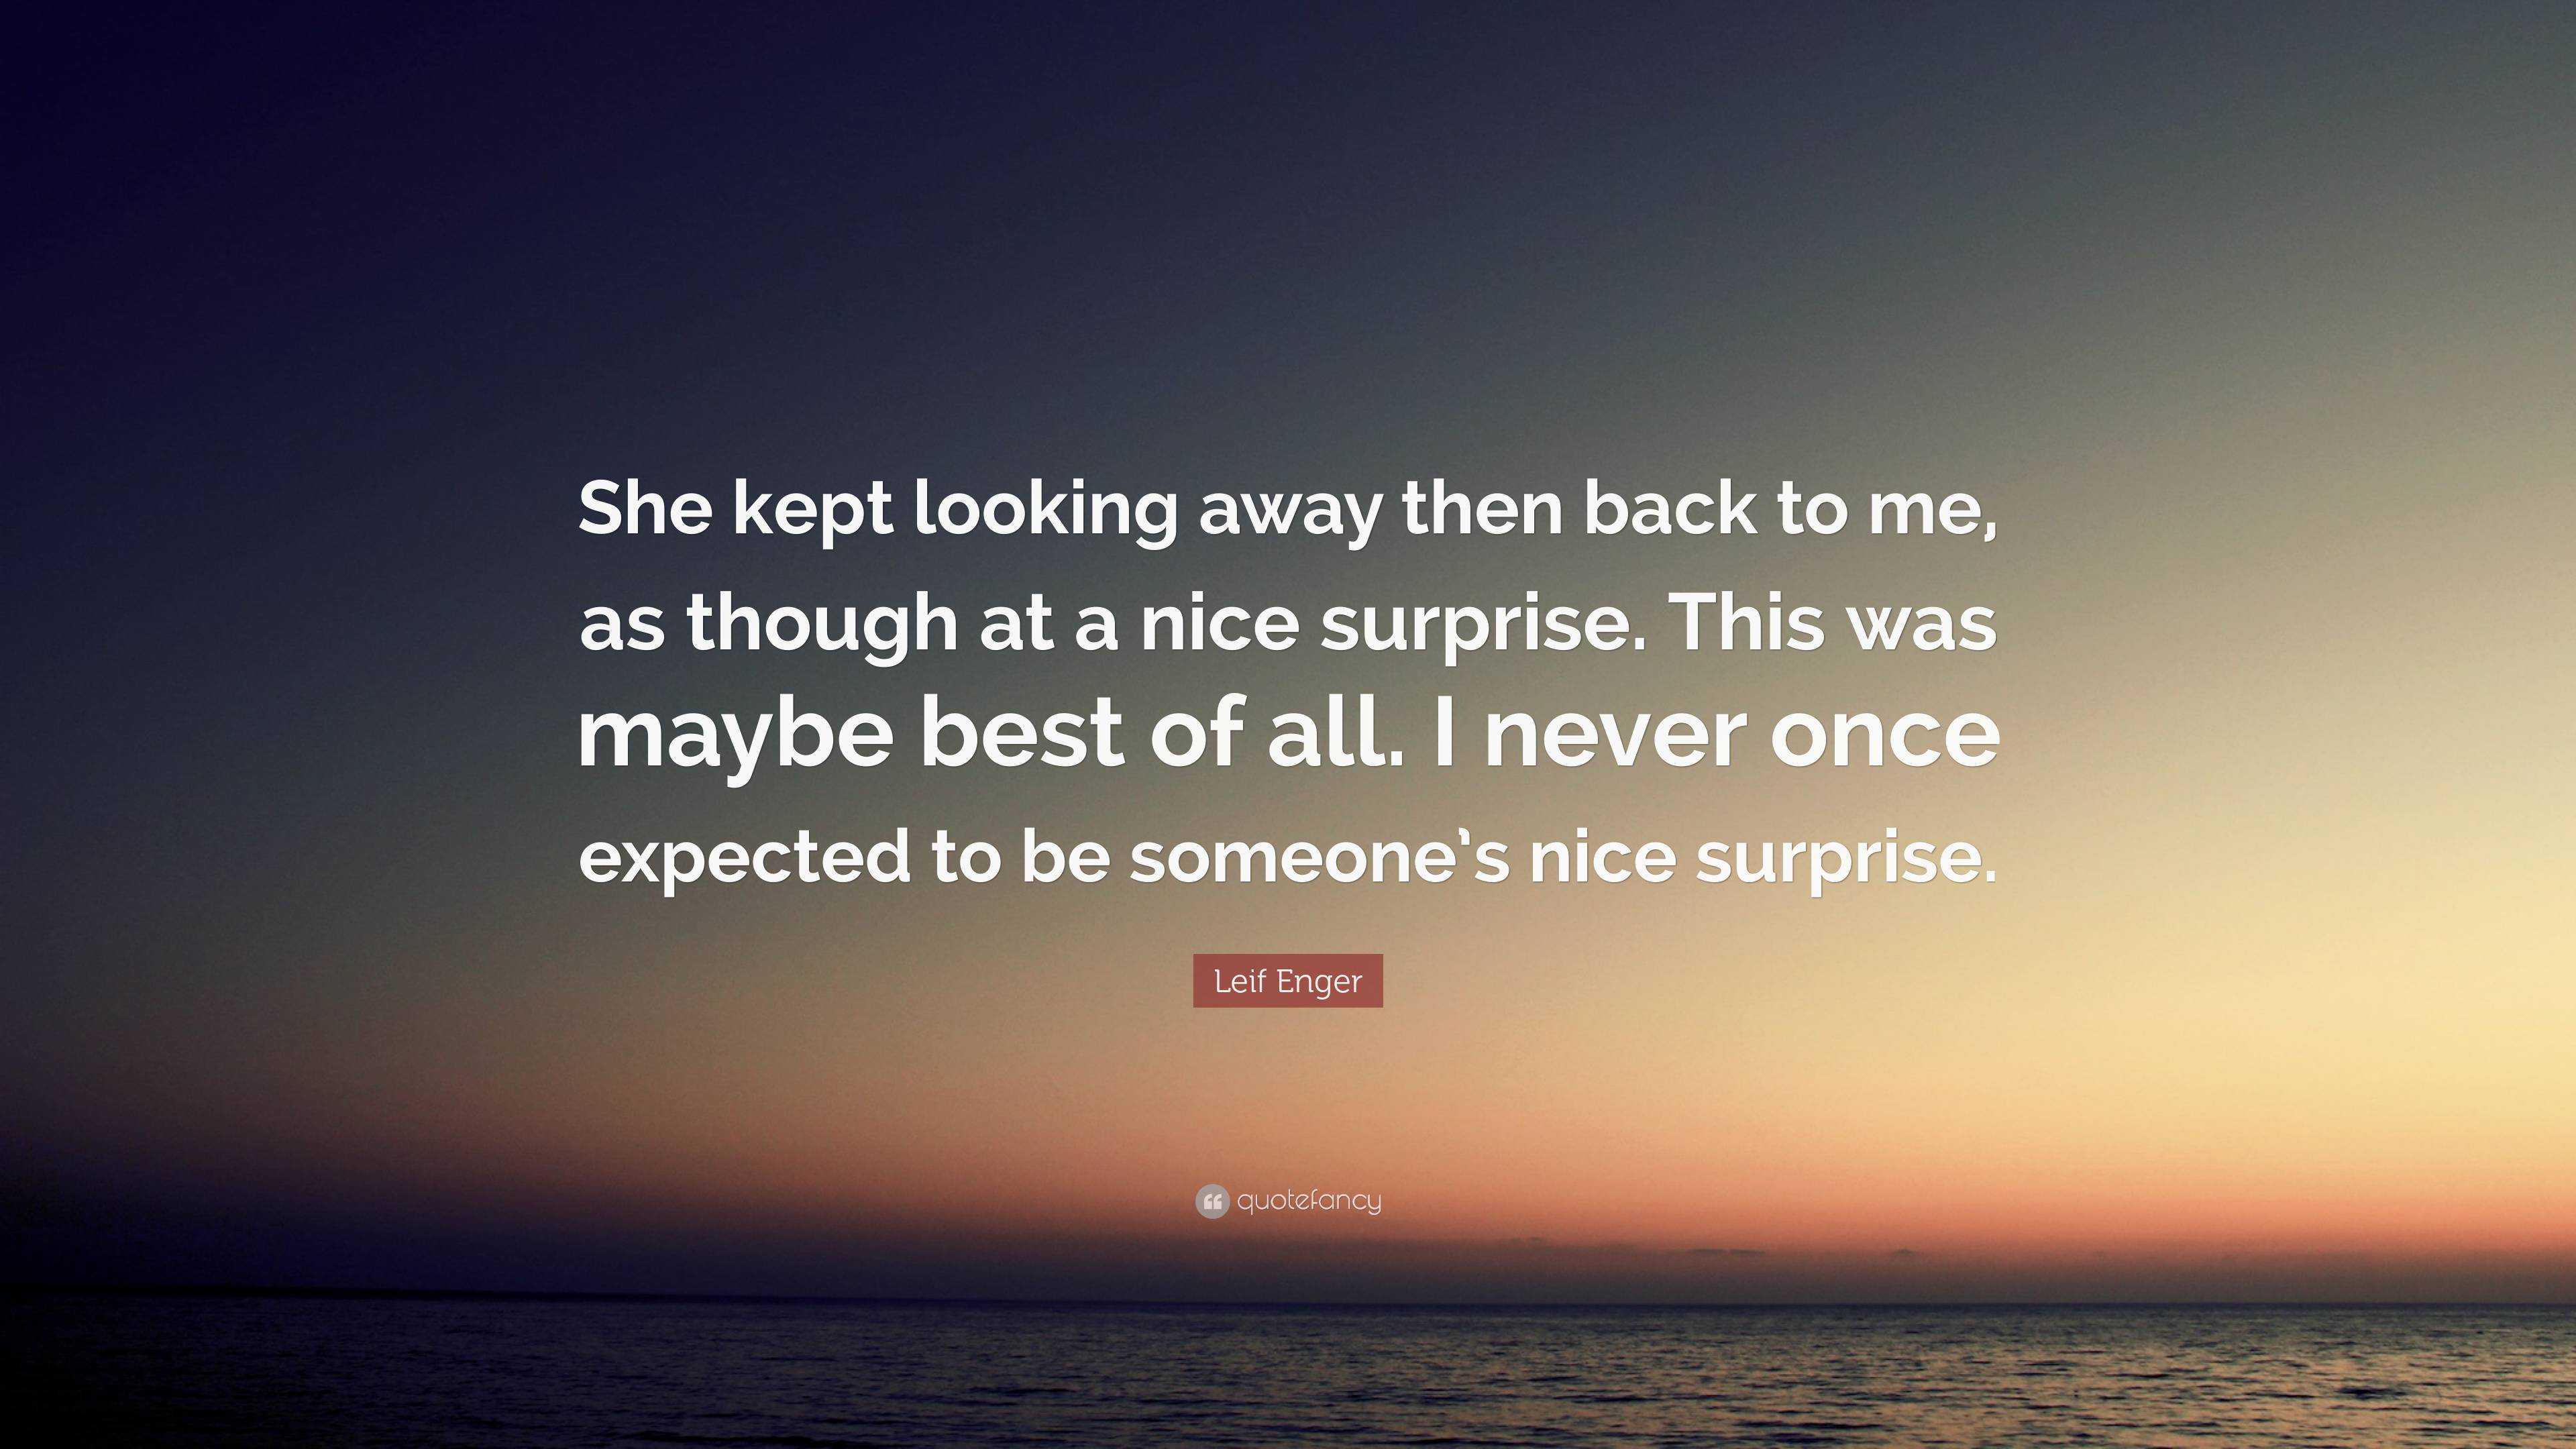 Leif Enger Quote: “She kept looking away then back to me, as though at ...